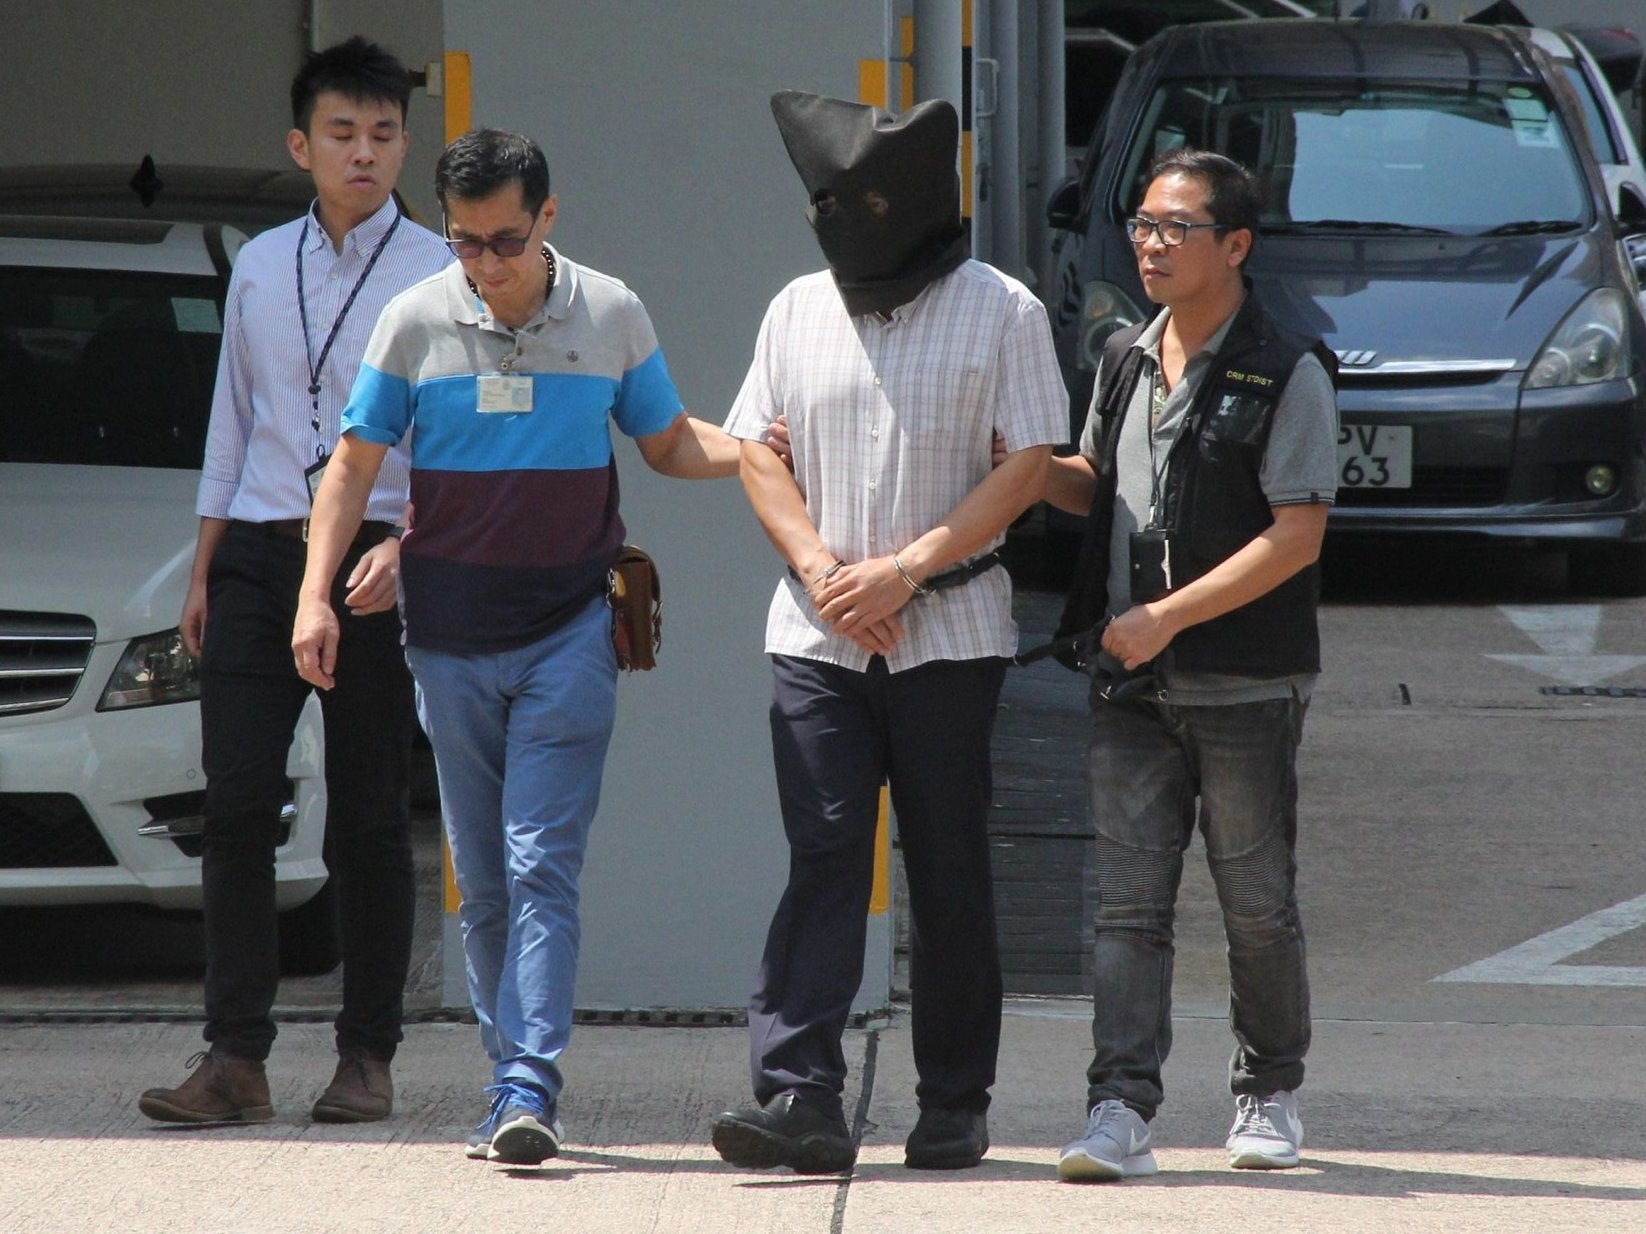 Khaw Kim Sun being escorted by Hong Kong police in 2017